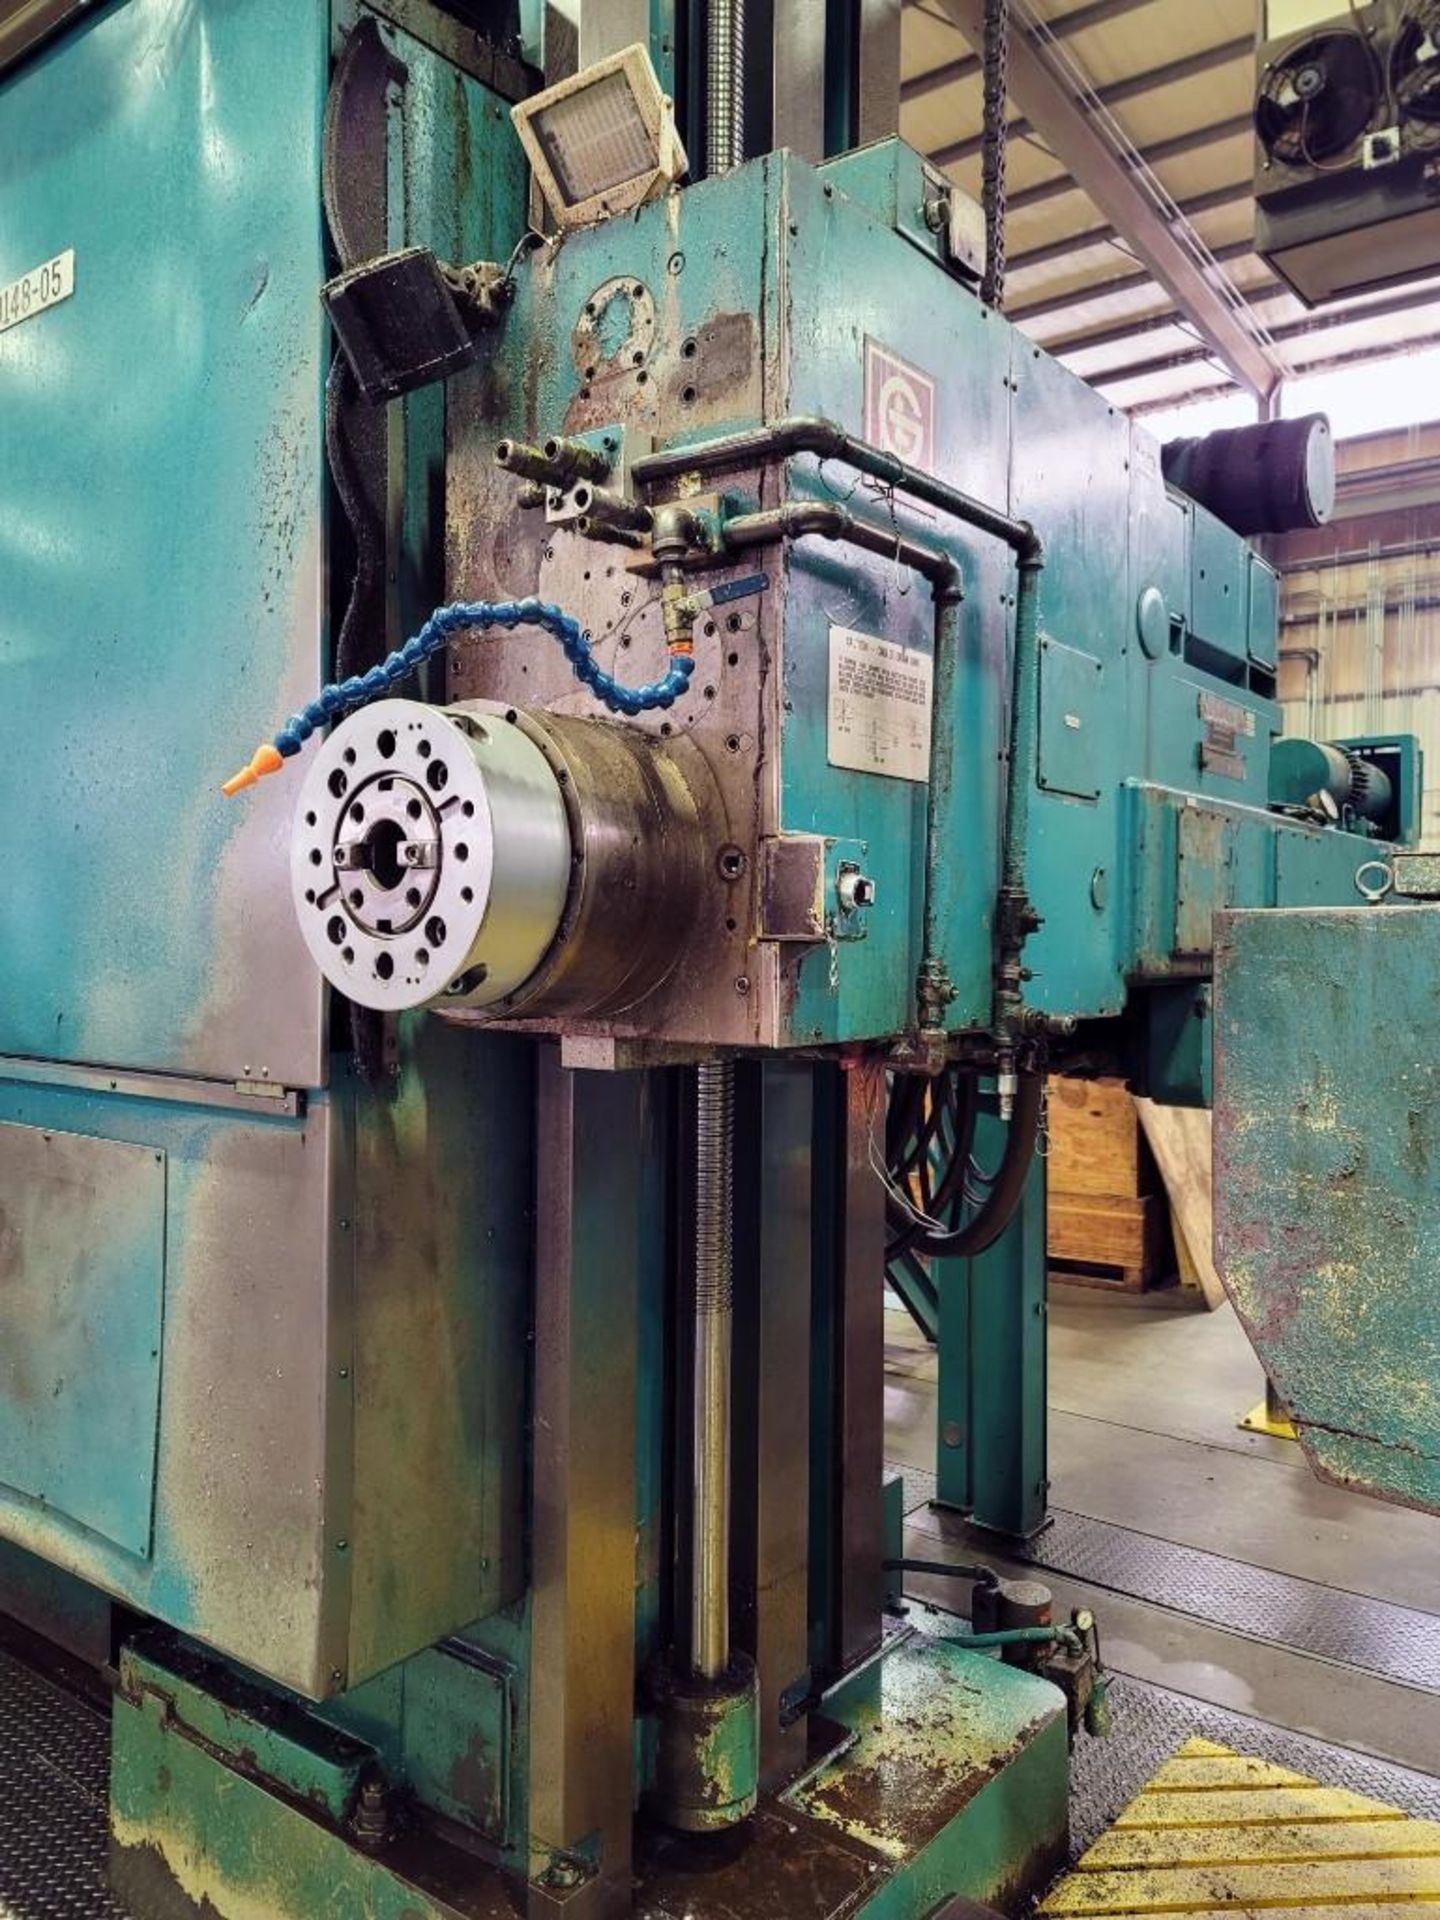 6" Giddings & Lewis CNC Horizontal Boring Mill with 48" x 60" Twin Pallets - Image 5 of 14